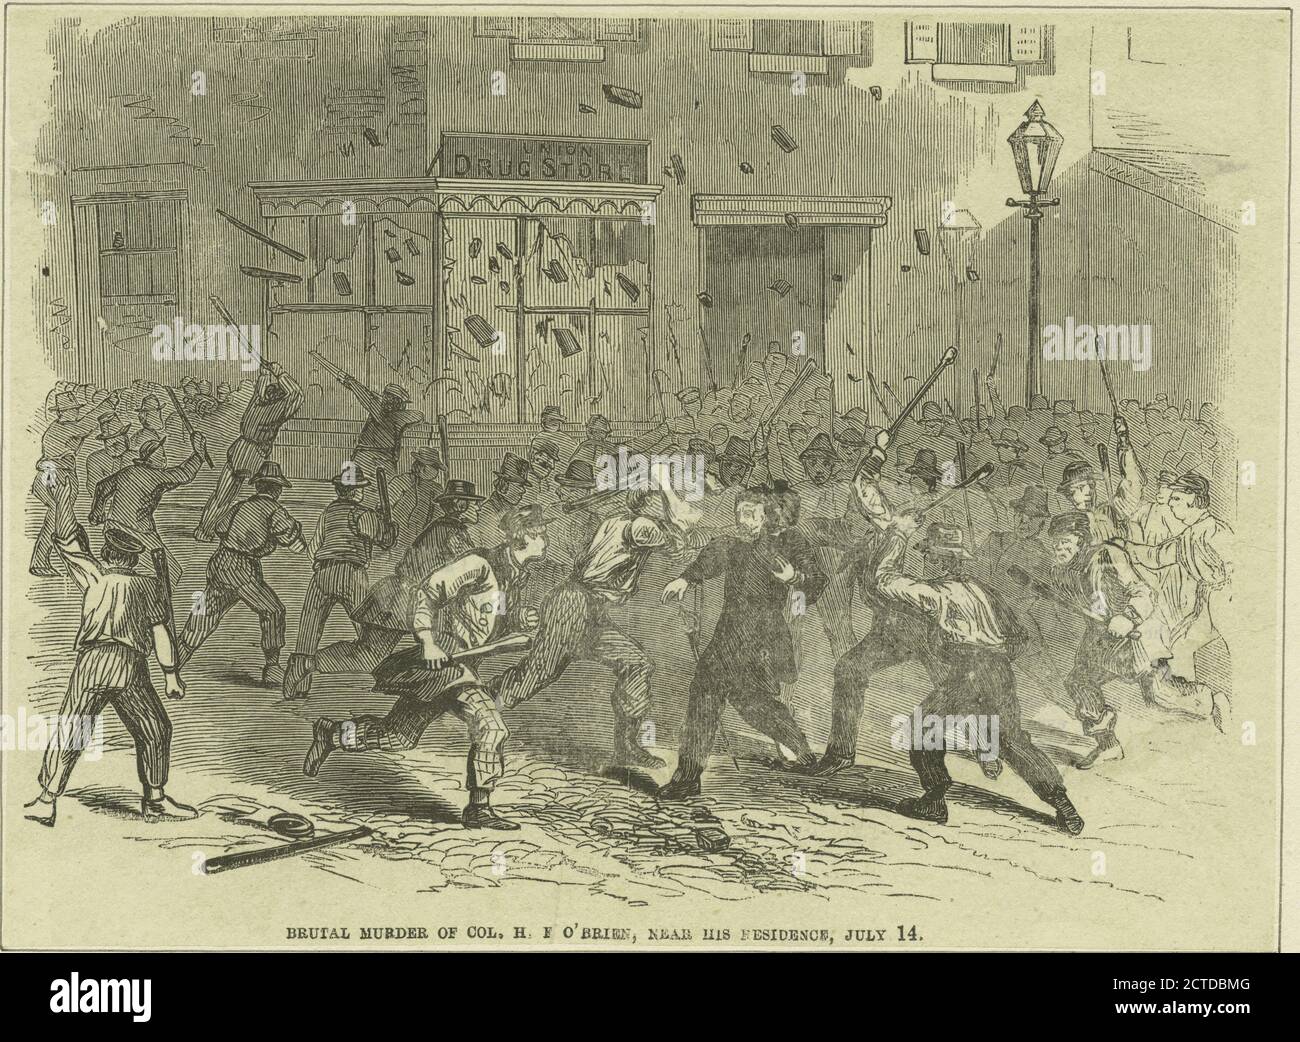 Brutal murder of Col. H.F. O'Brien, near his residence, July 14, still image, Prints, 1861 - 1880 Stock Photo